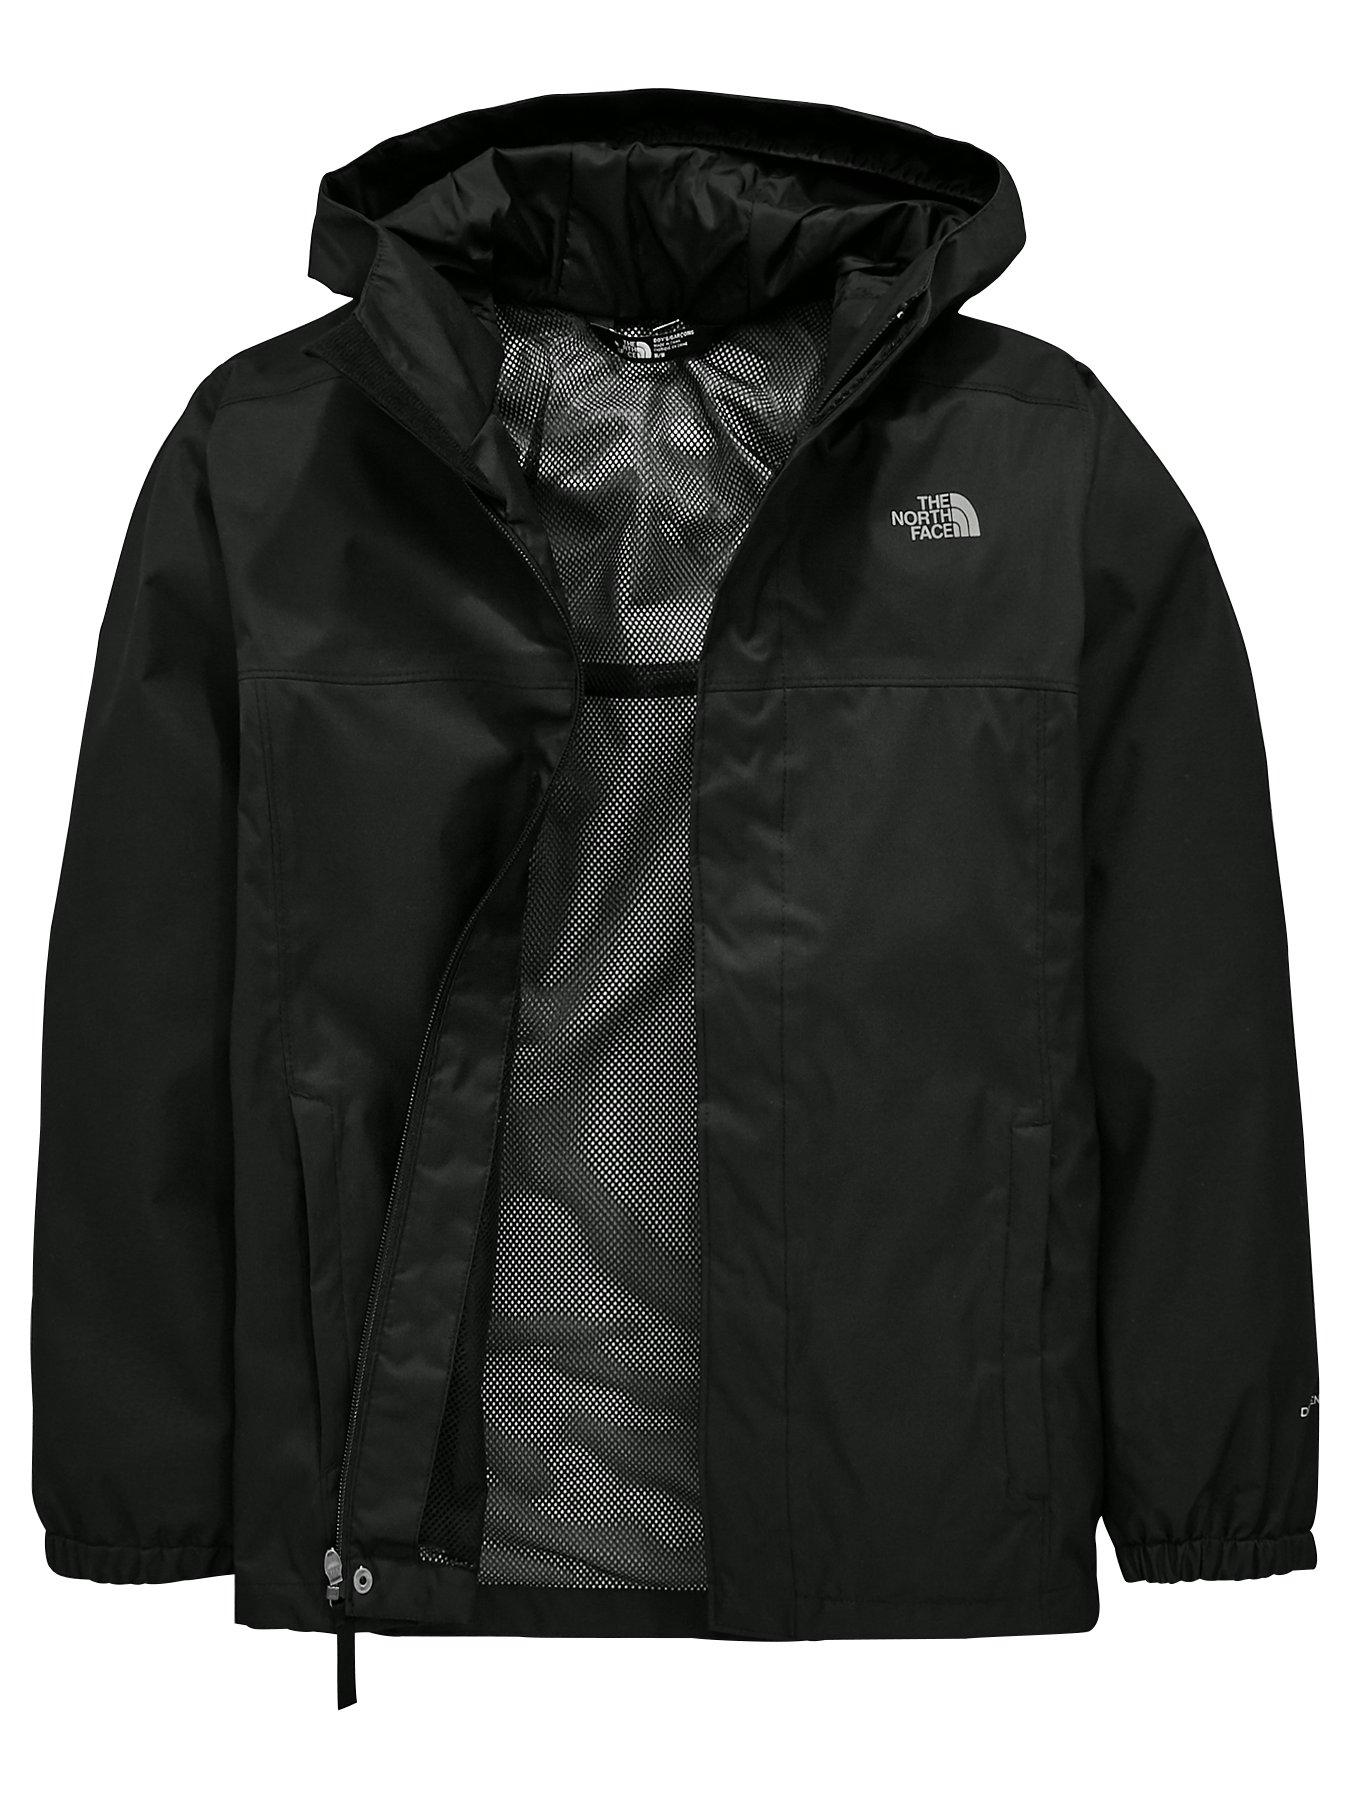 north face kids sizes